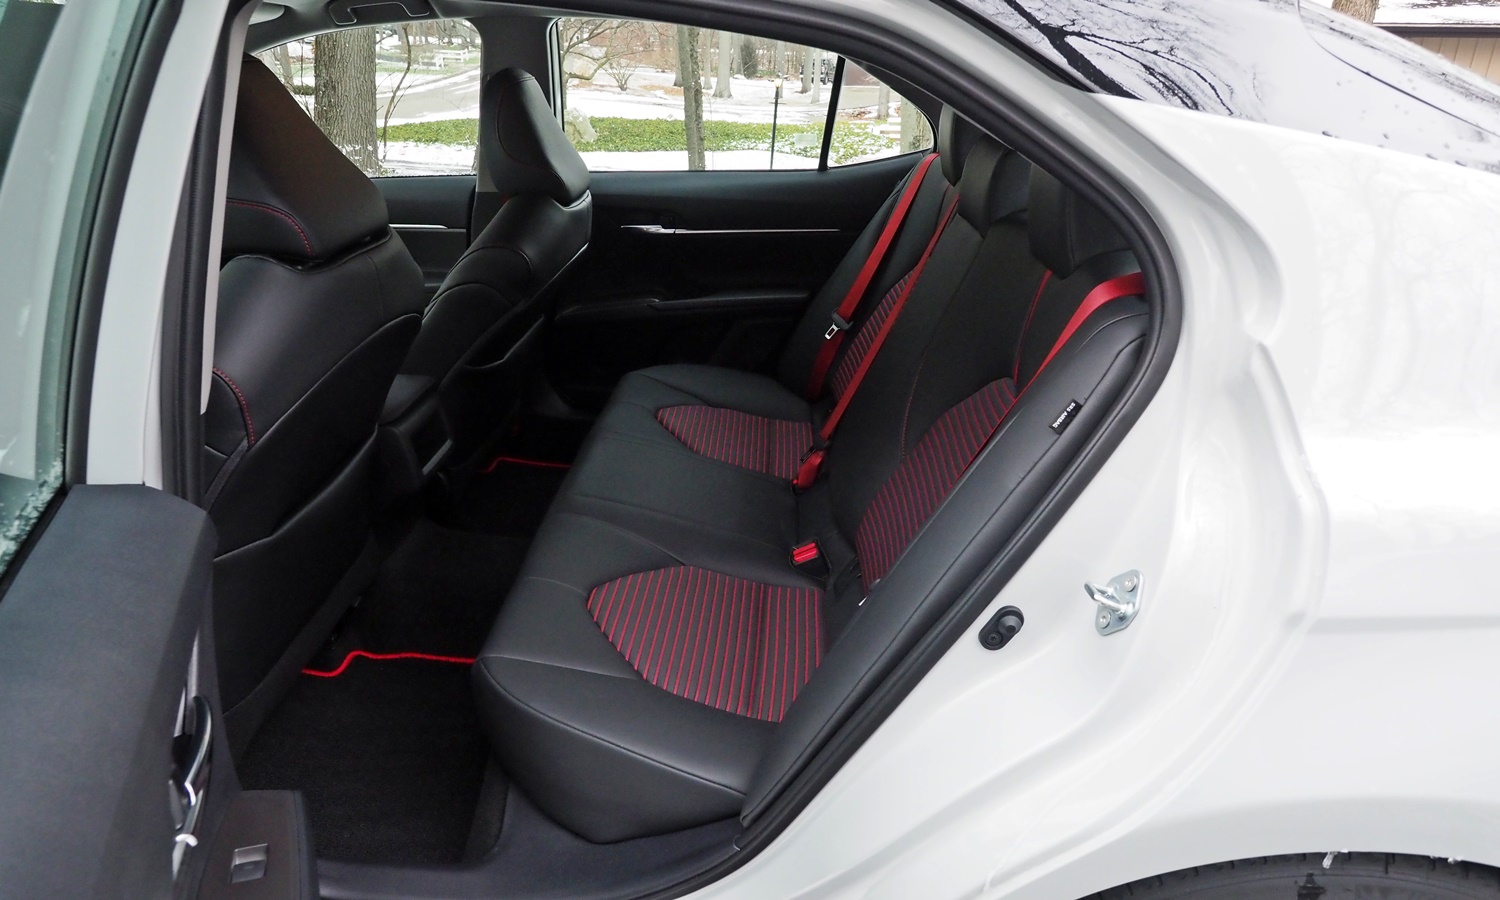 Camry Reviews: Toyota Camry TRD rear seat